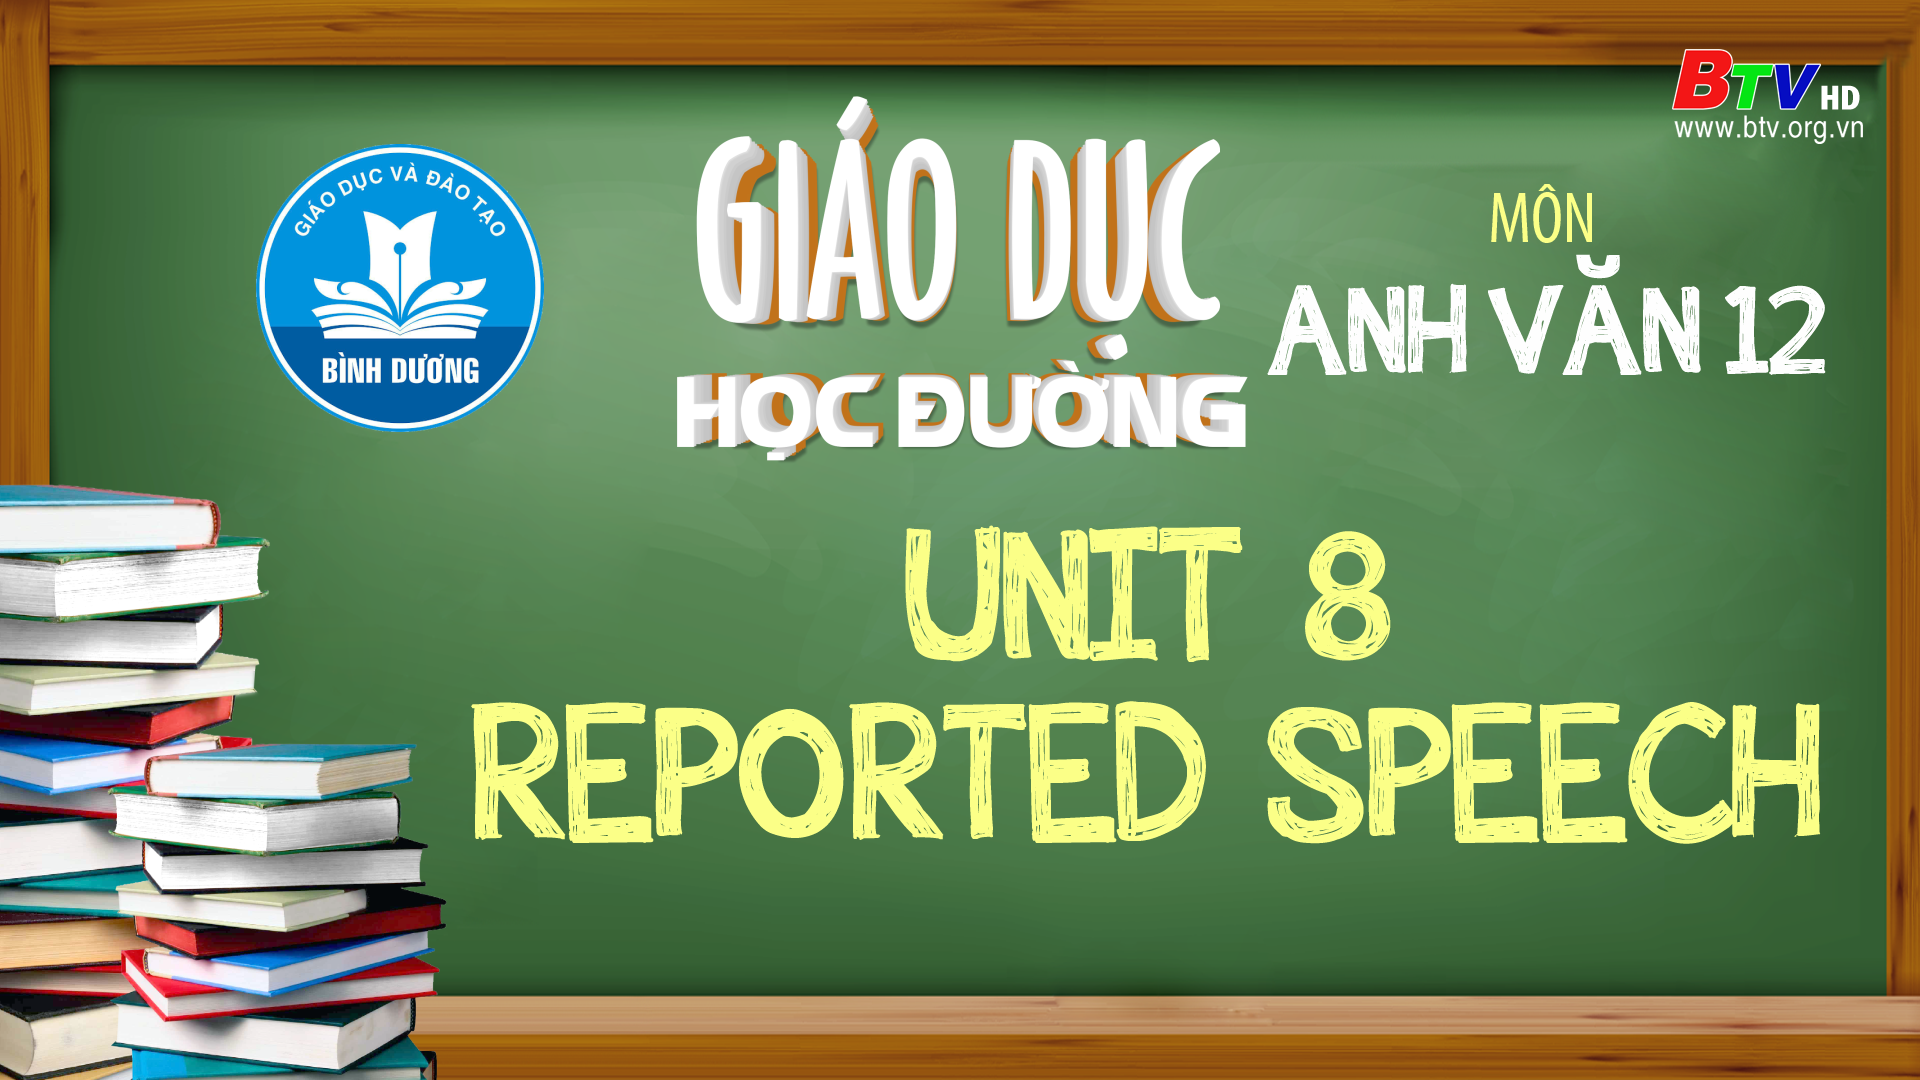 25-3 Môn tiếng anh lớp 12: Unit 8: Reported speech